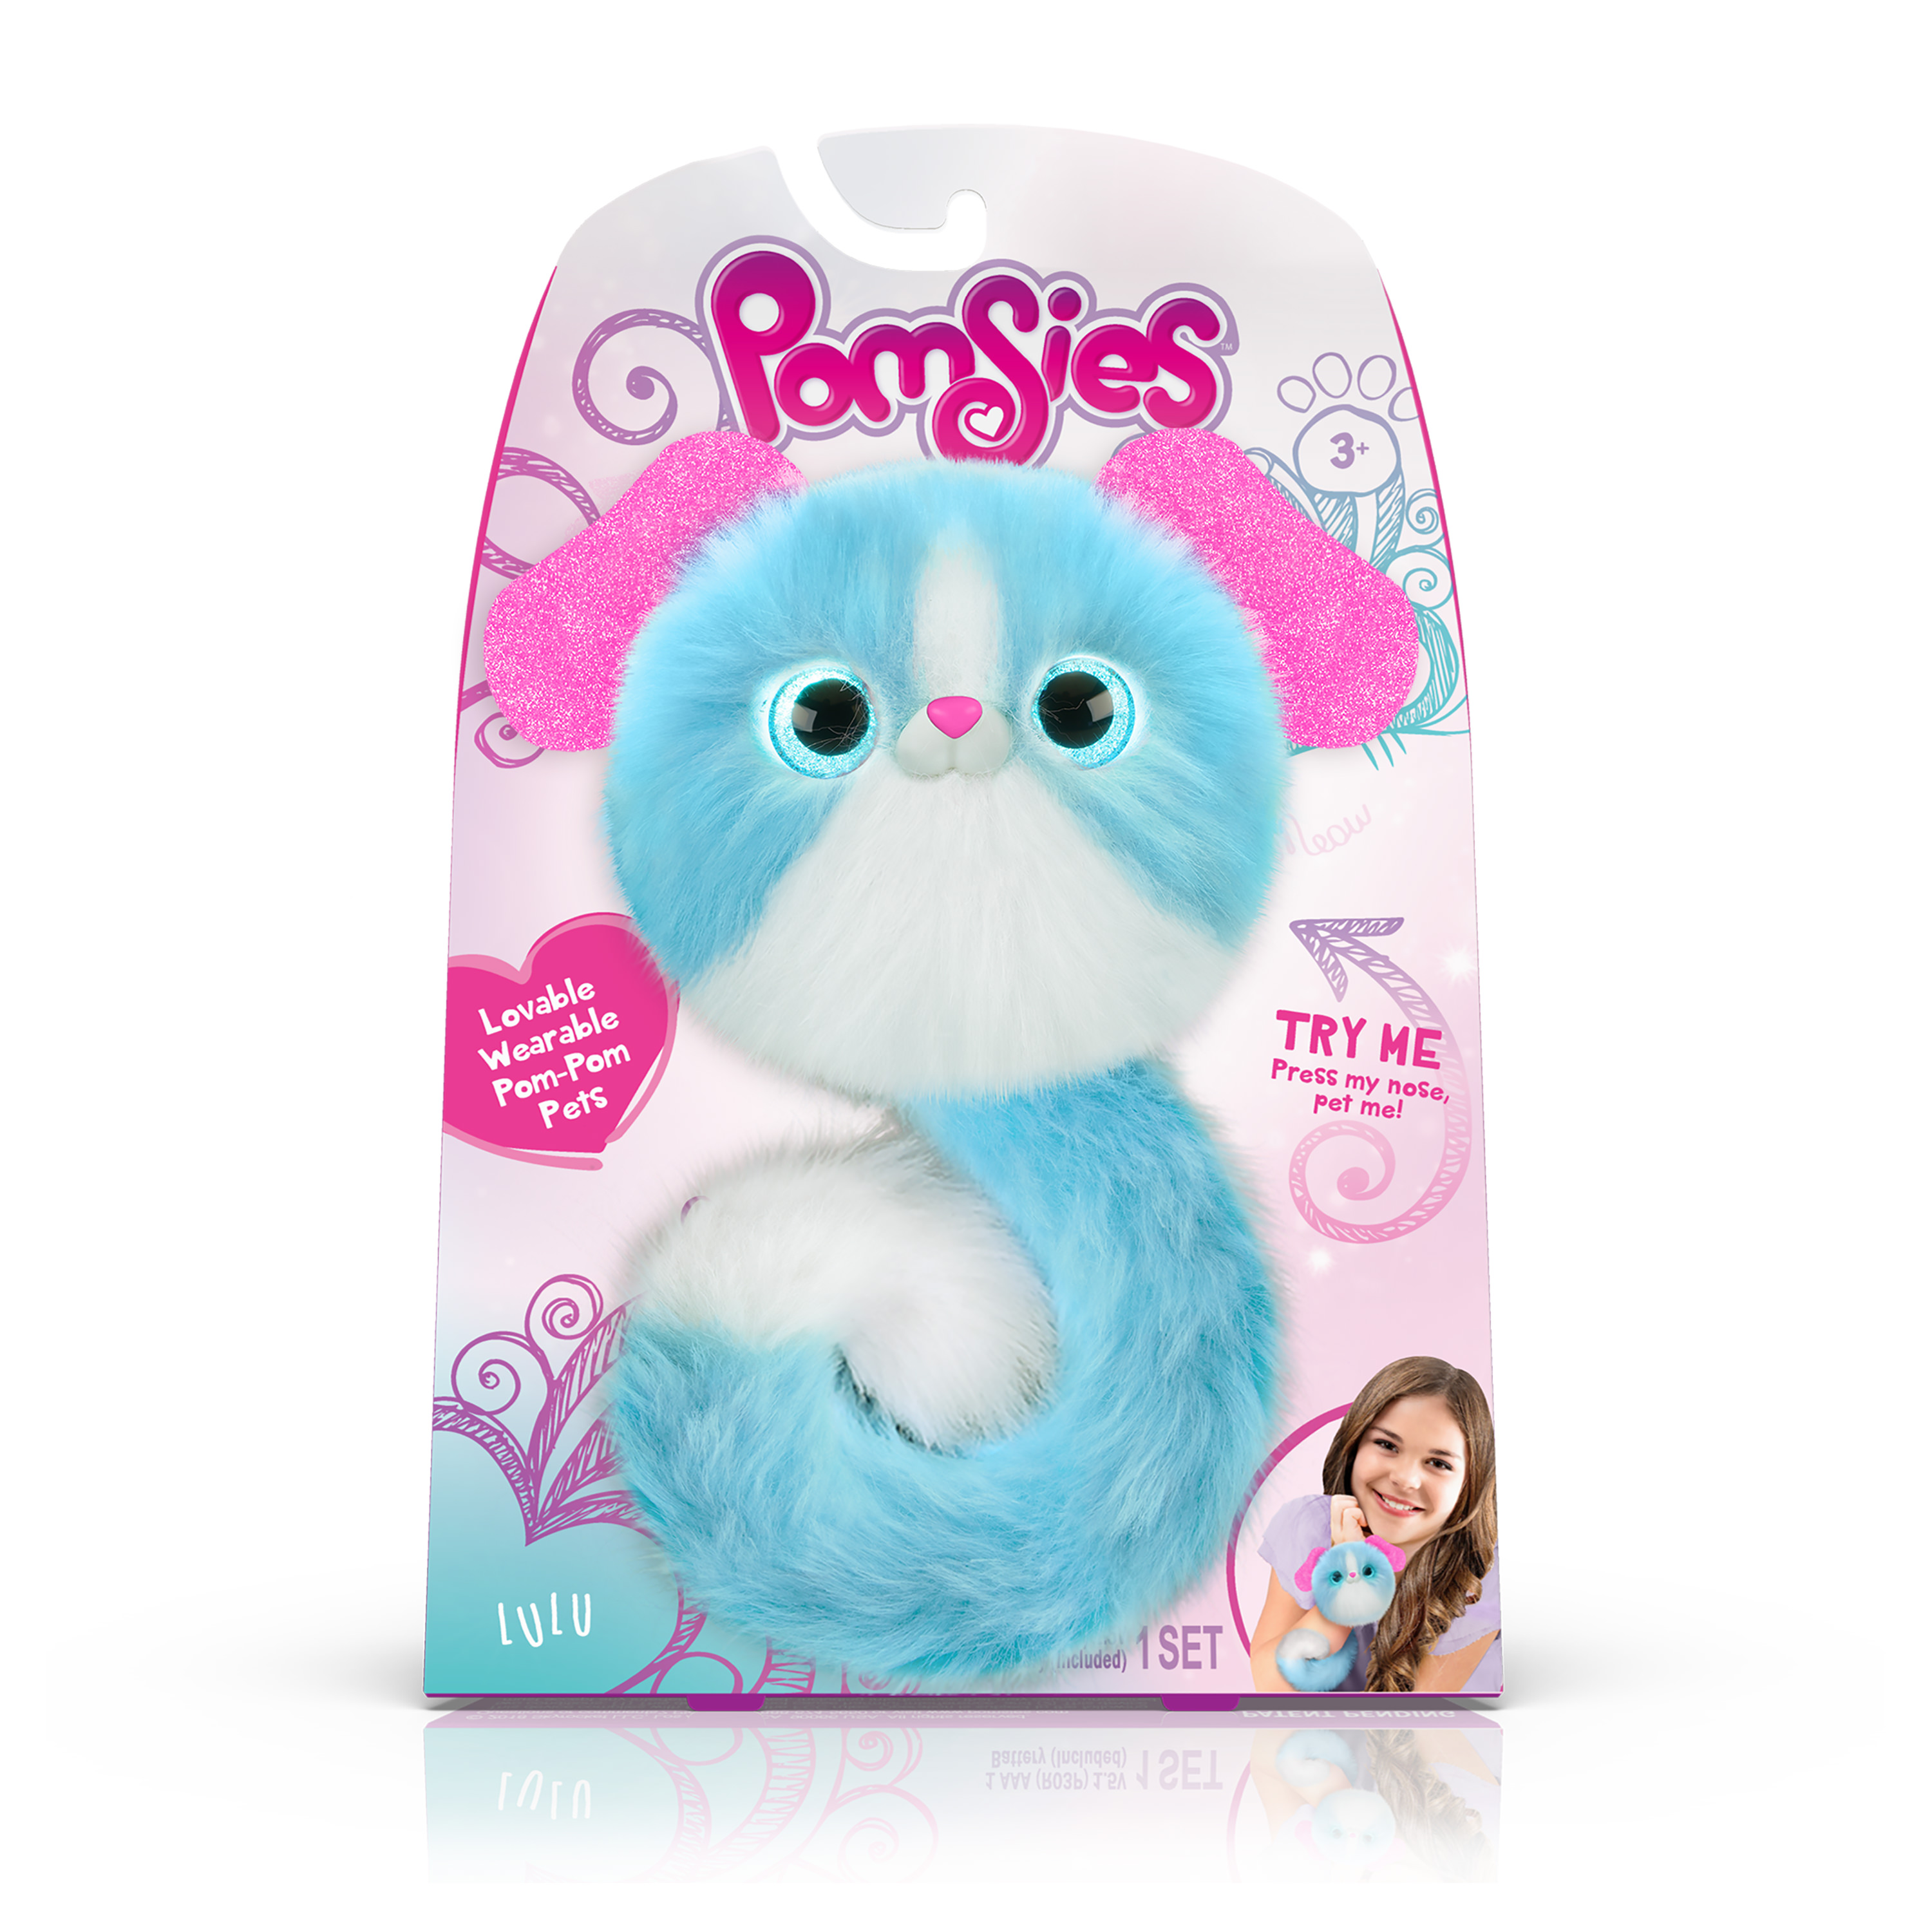 Pomsies Pet Lulu- Plush Interactive Toy - image 1 of 4